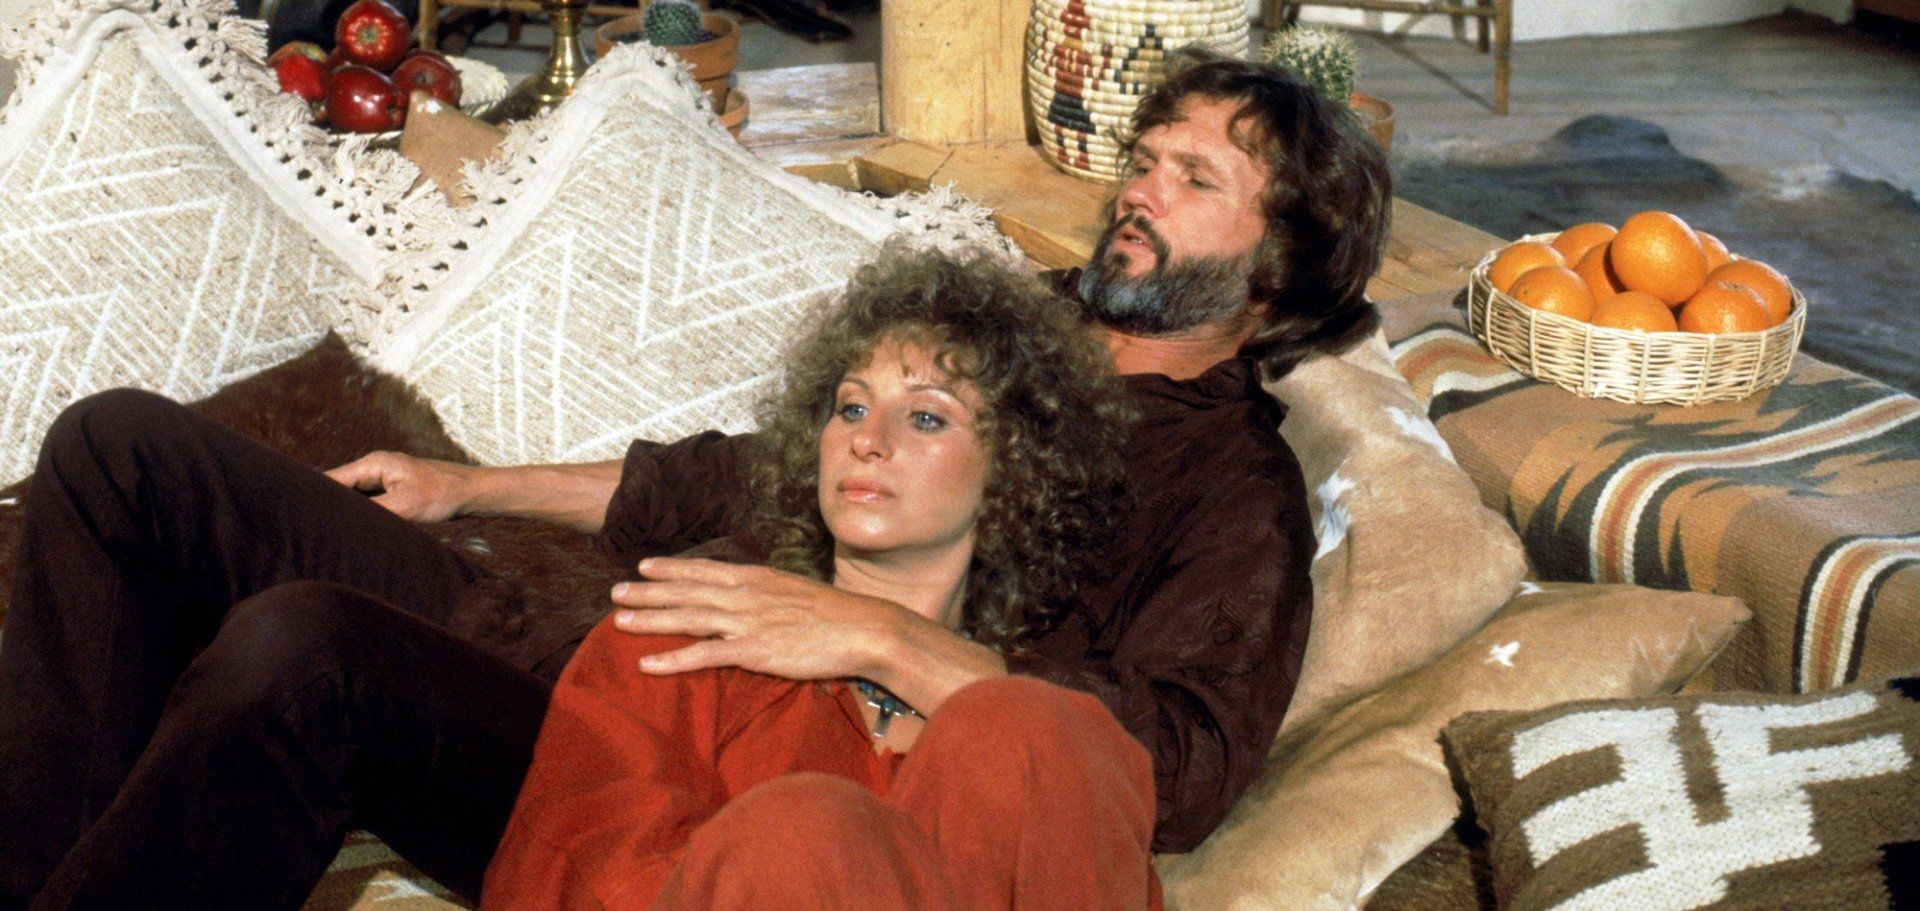 Kristofferson and Streisand in A Star Is Born, 1976.